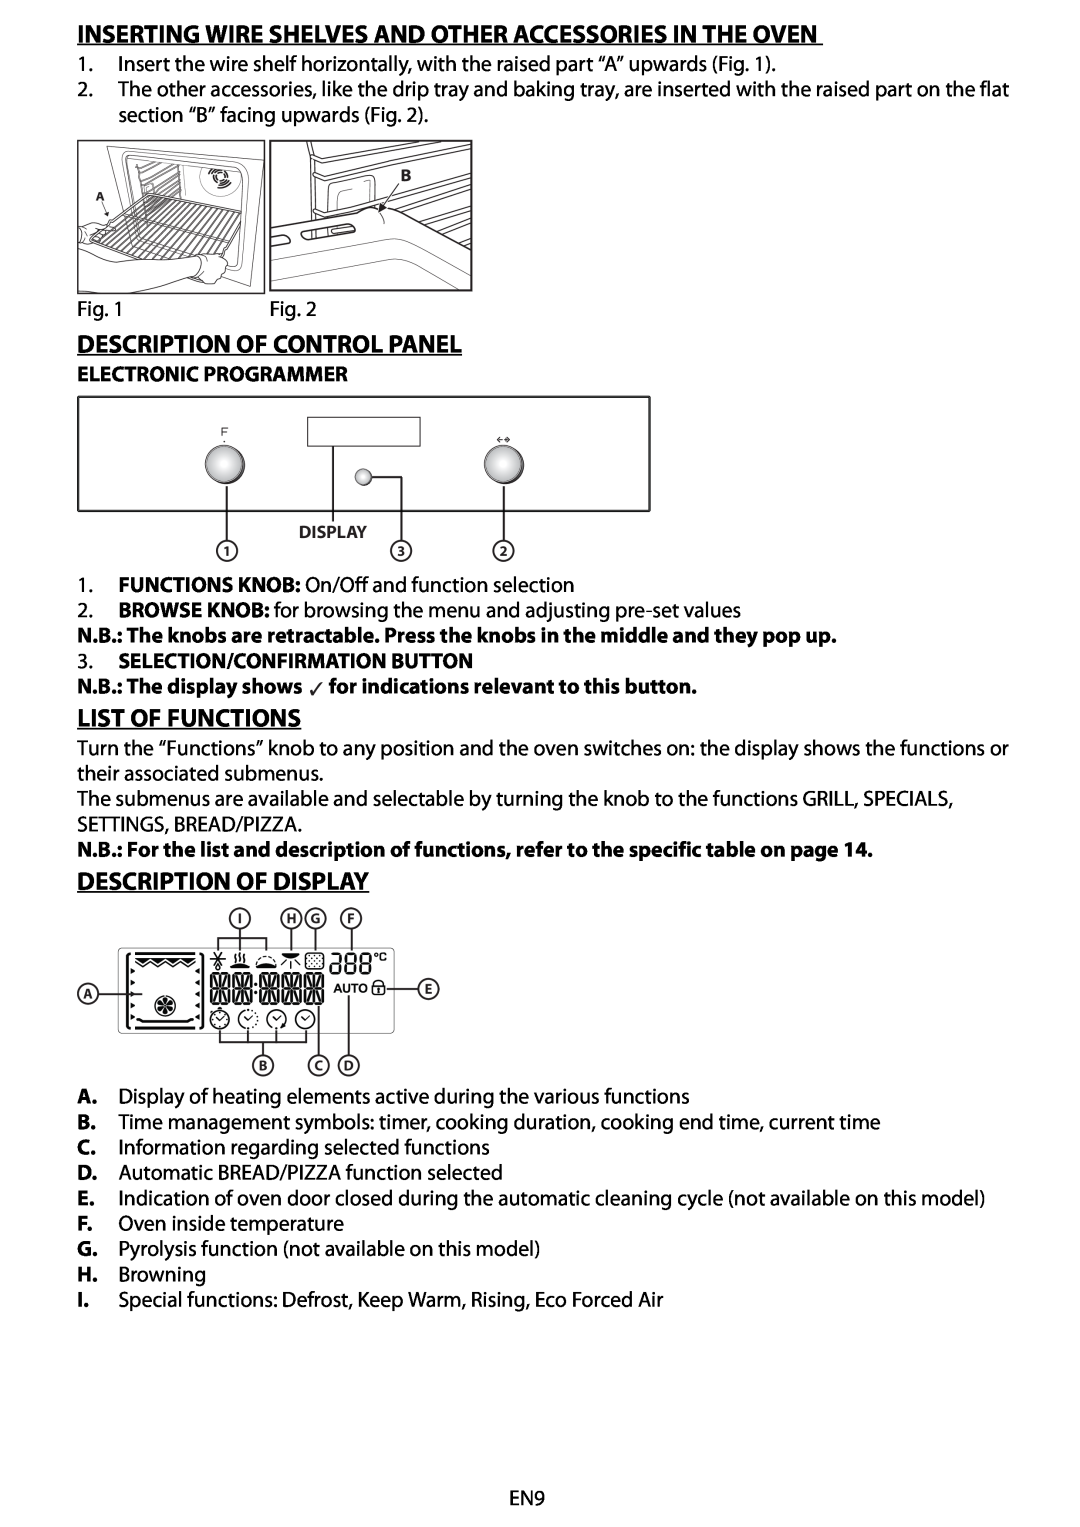 Whirlpool AKZ 561 manual Inserting Wire Shelves And Other Accessories In The Oven, Description Of Control Panel 